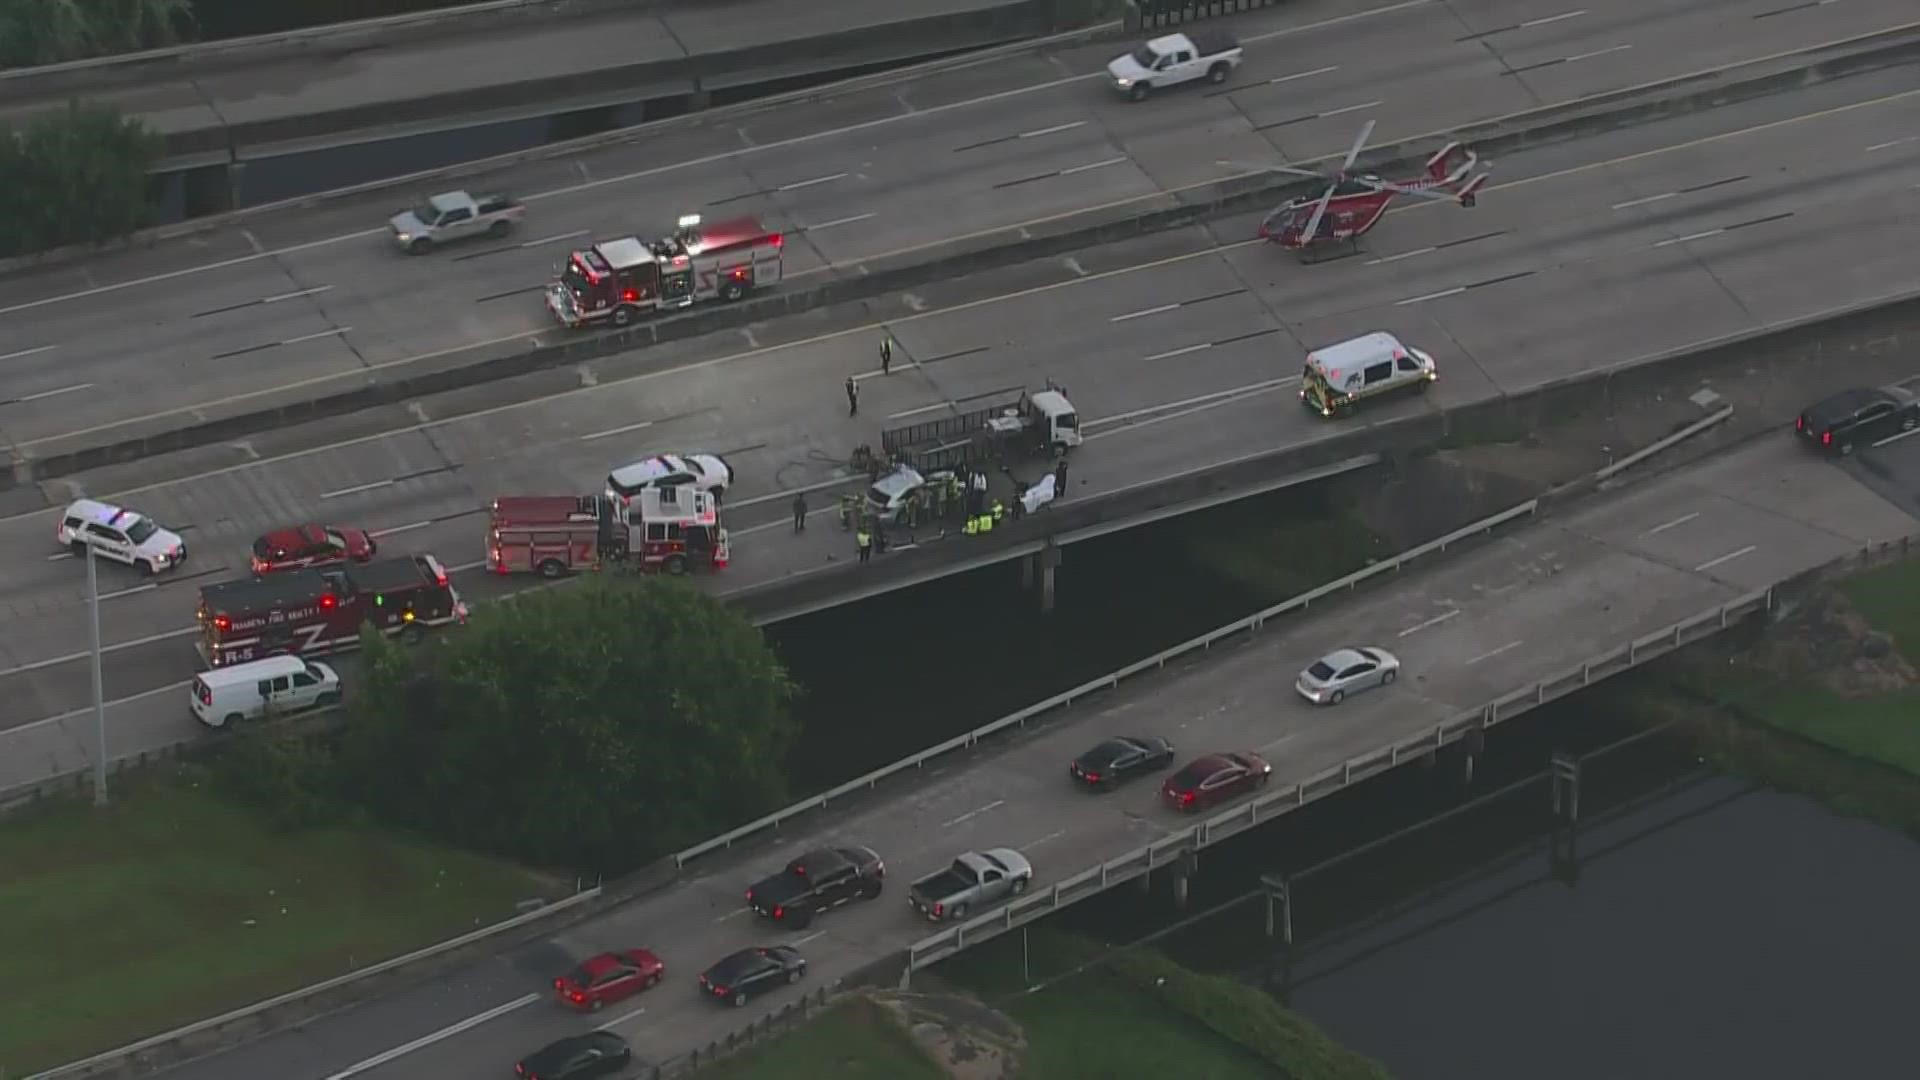 Air 11 is over yet another major crash this morning southeast of Houston